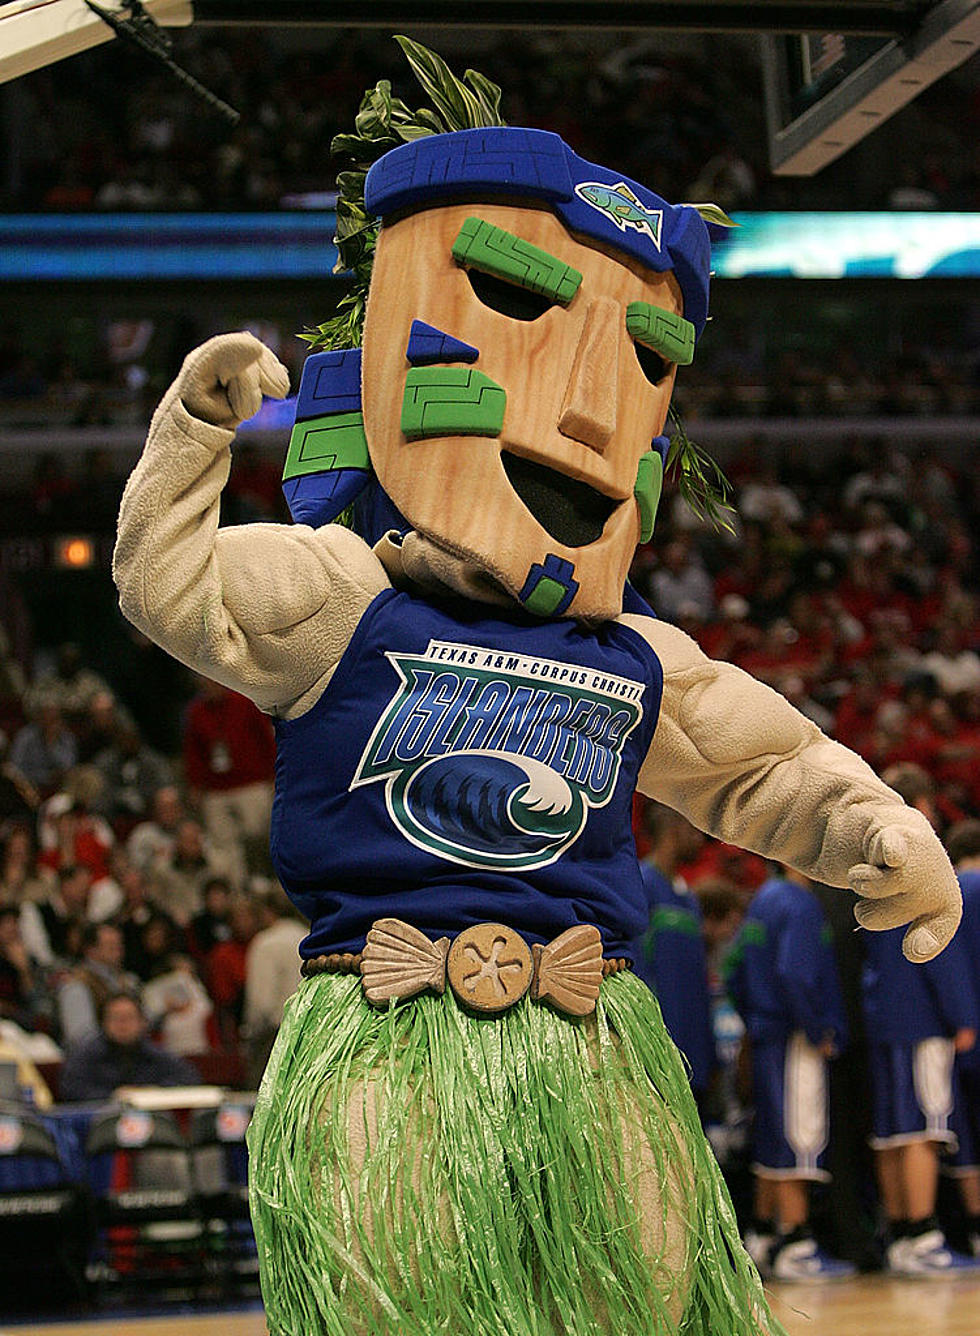 Texas A&M Corpus Christi Changing Mascot After it Was Deemed Offensive